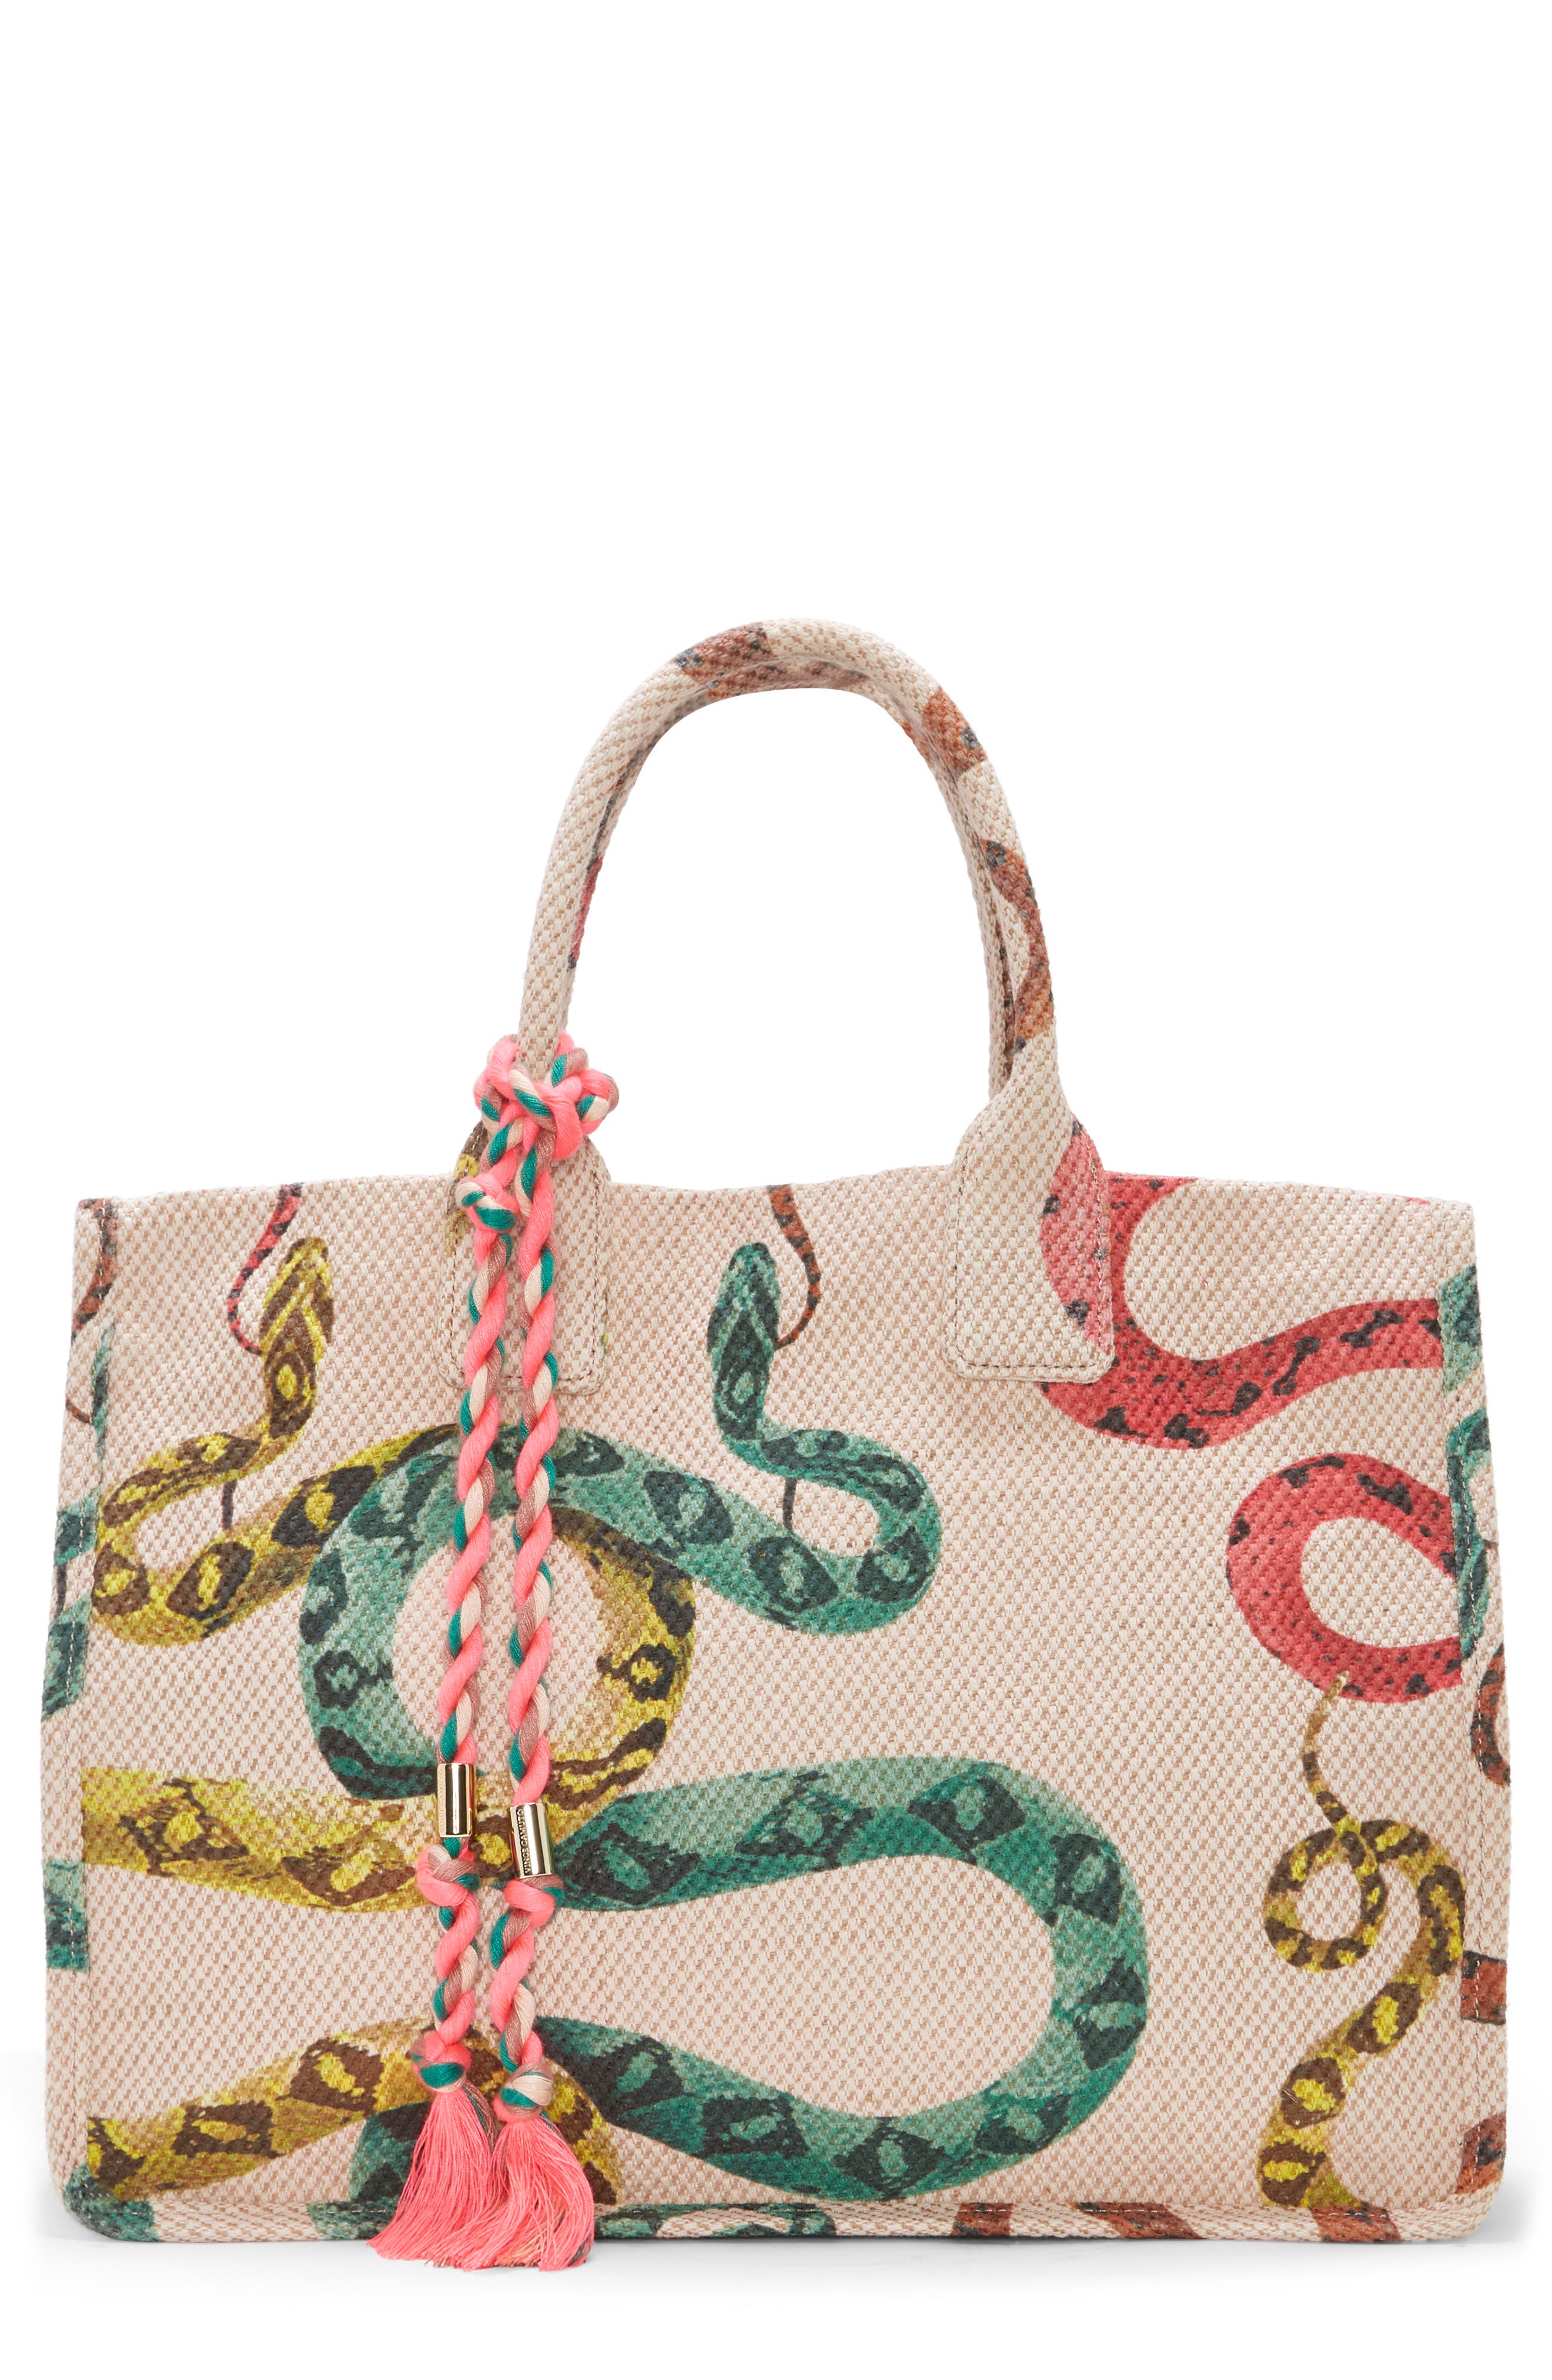 Vince Camuto Orla Printed Tote Bag In Coiled Snakes Pnk